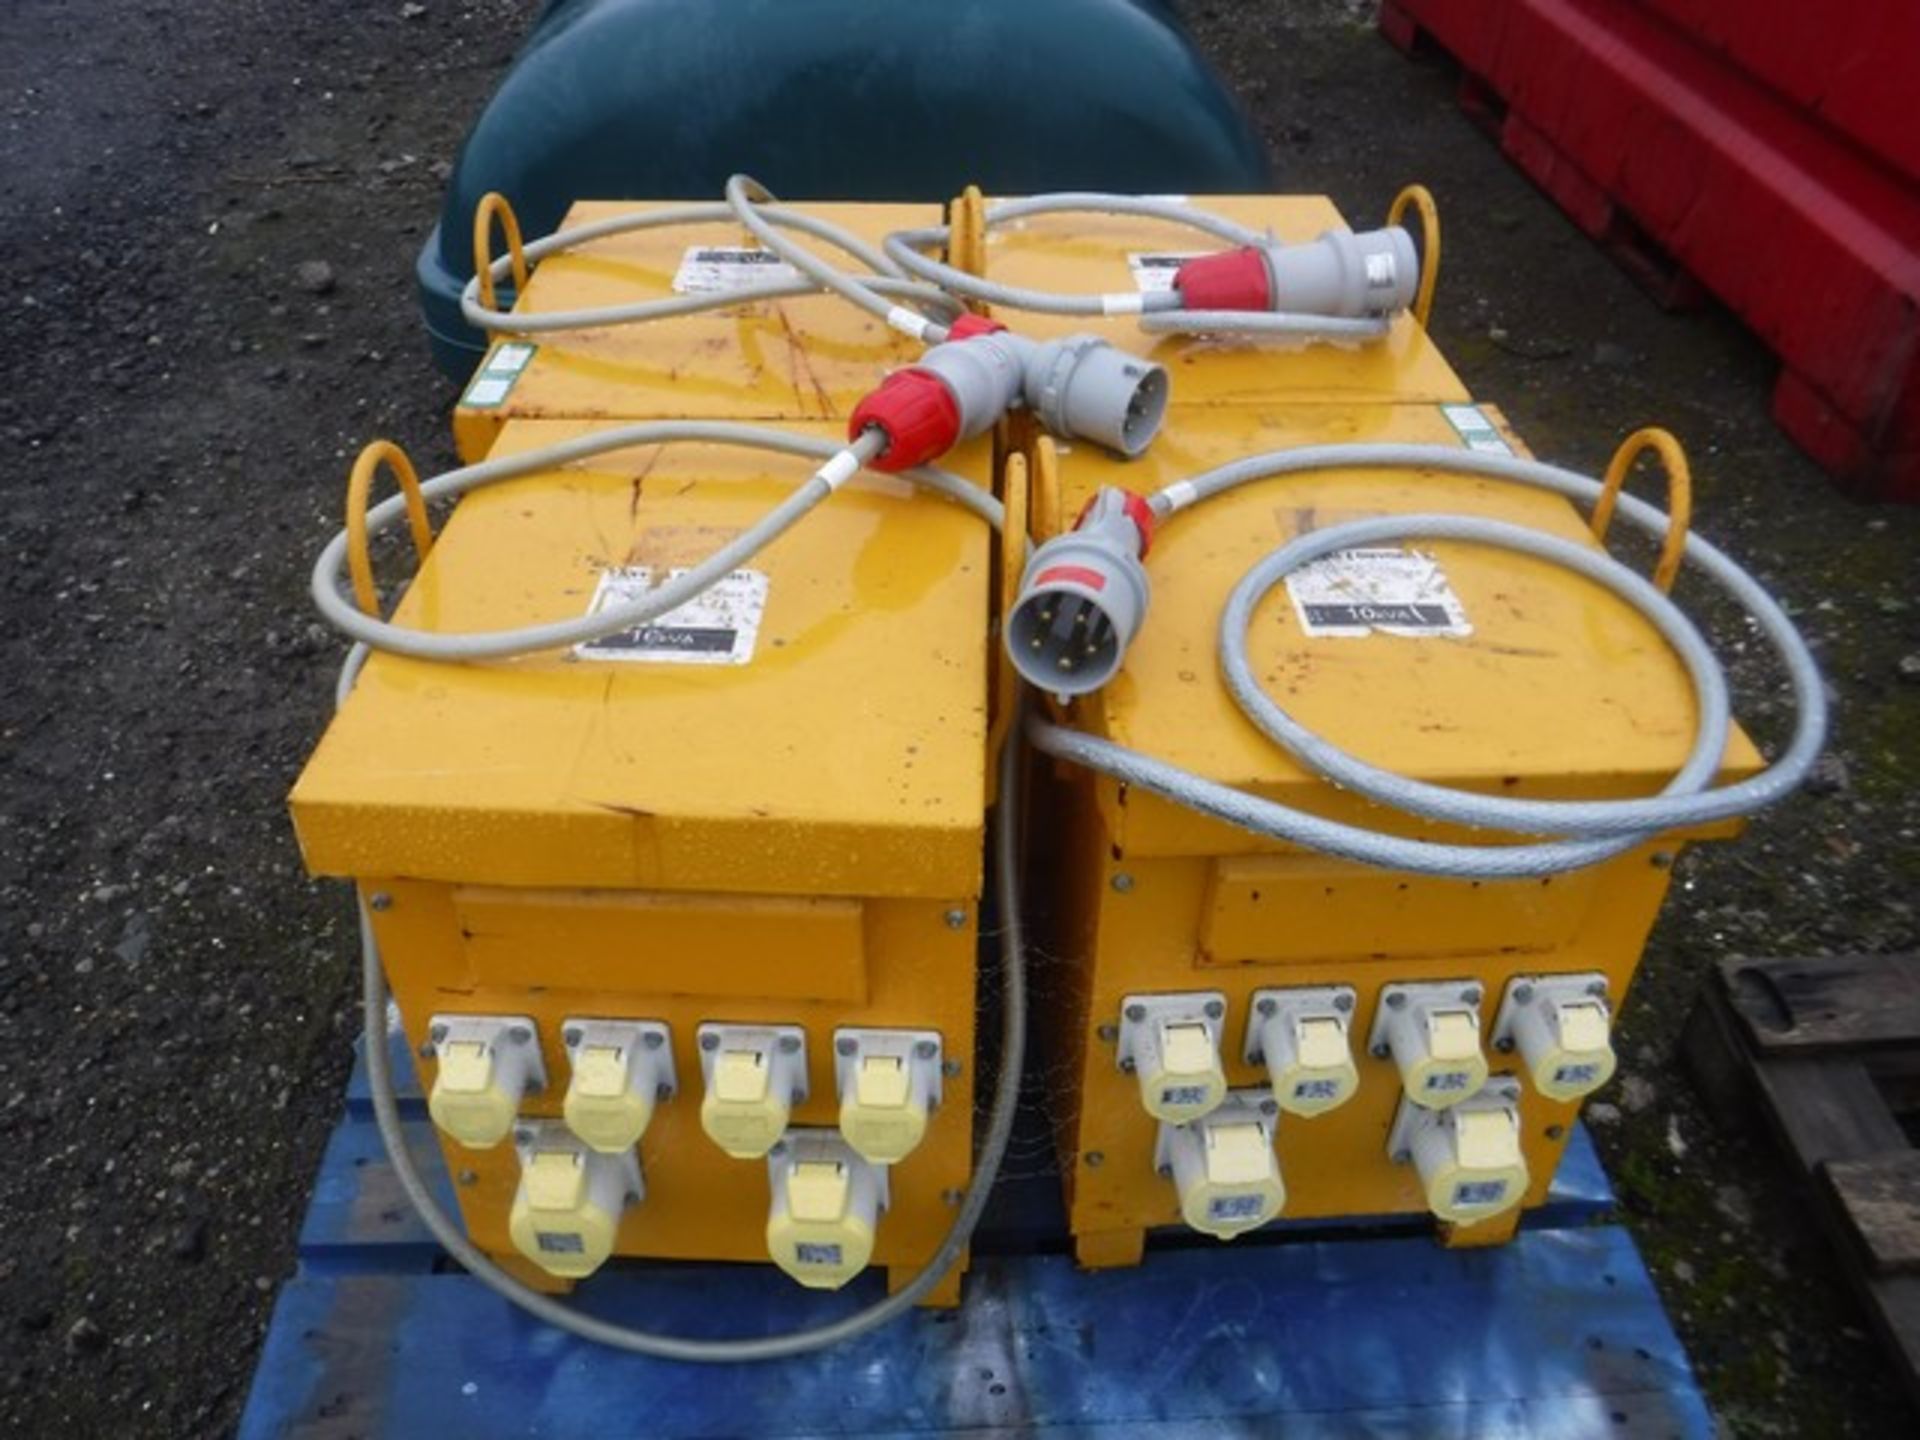 4 x 10 KVA 110 volt transformers, 4 x 16 amp outlets, 2 x 32 amp outlets - Image 2 of 2